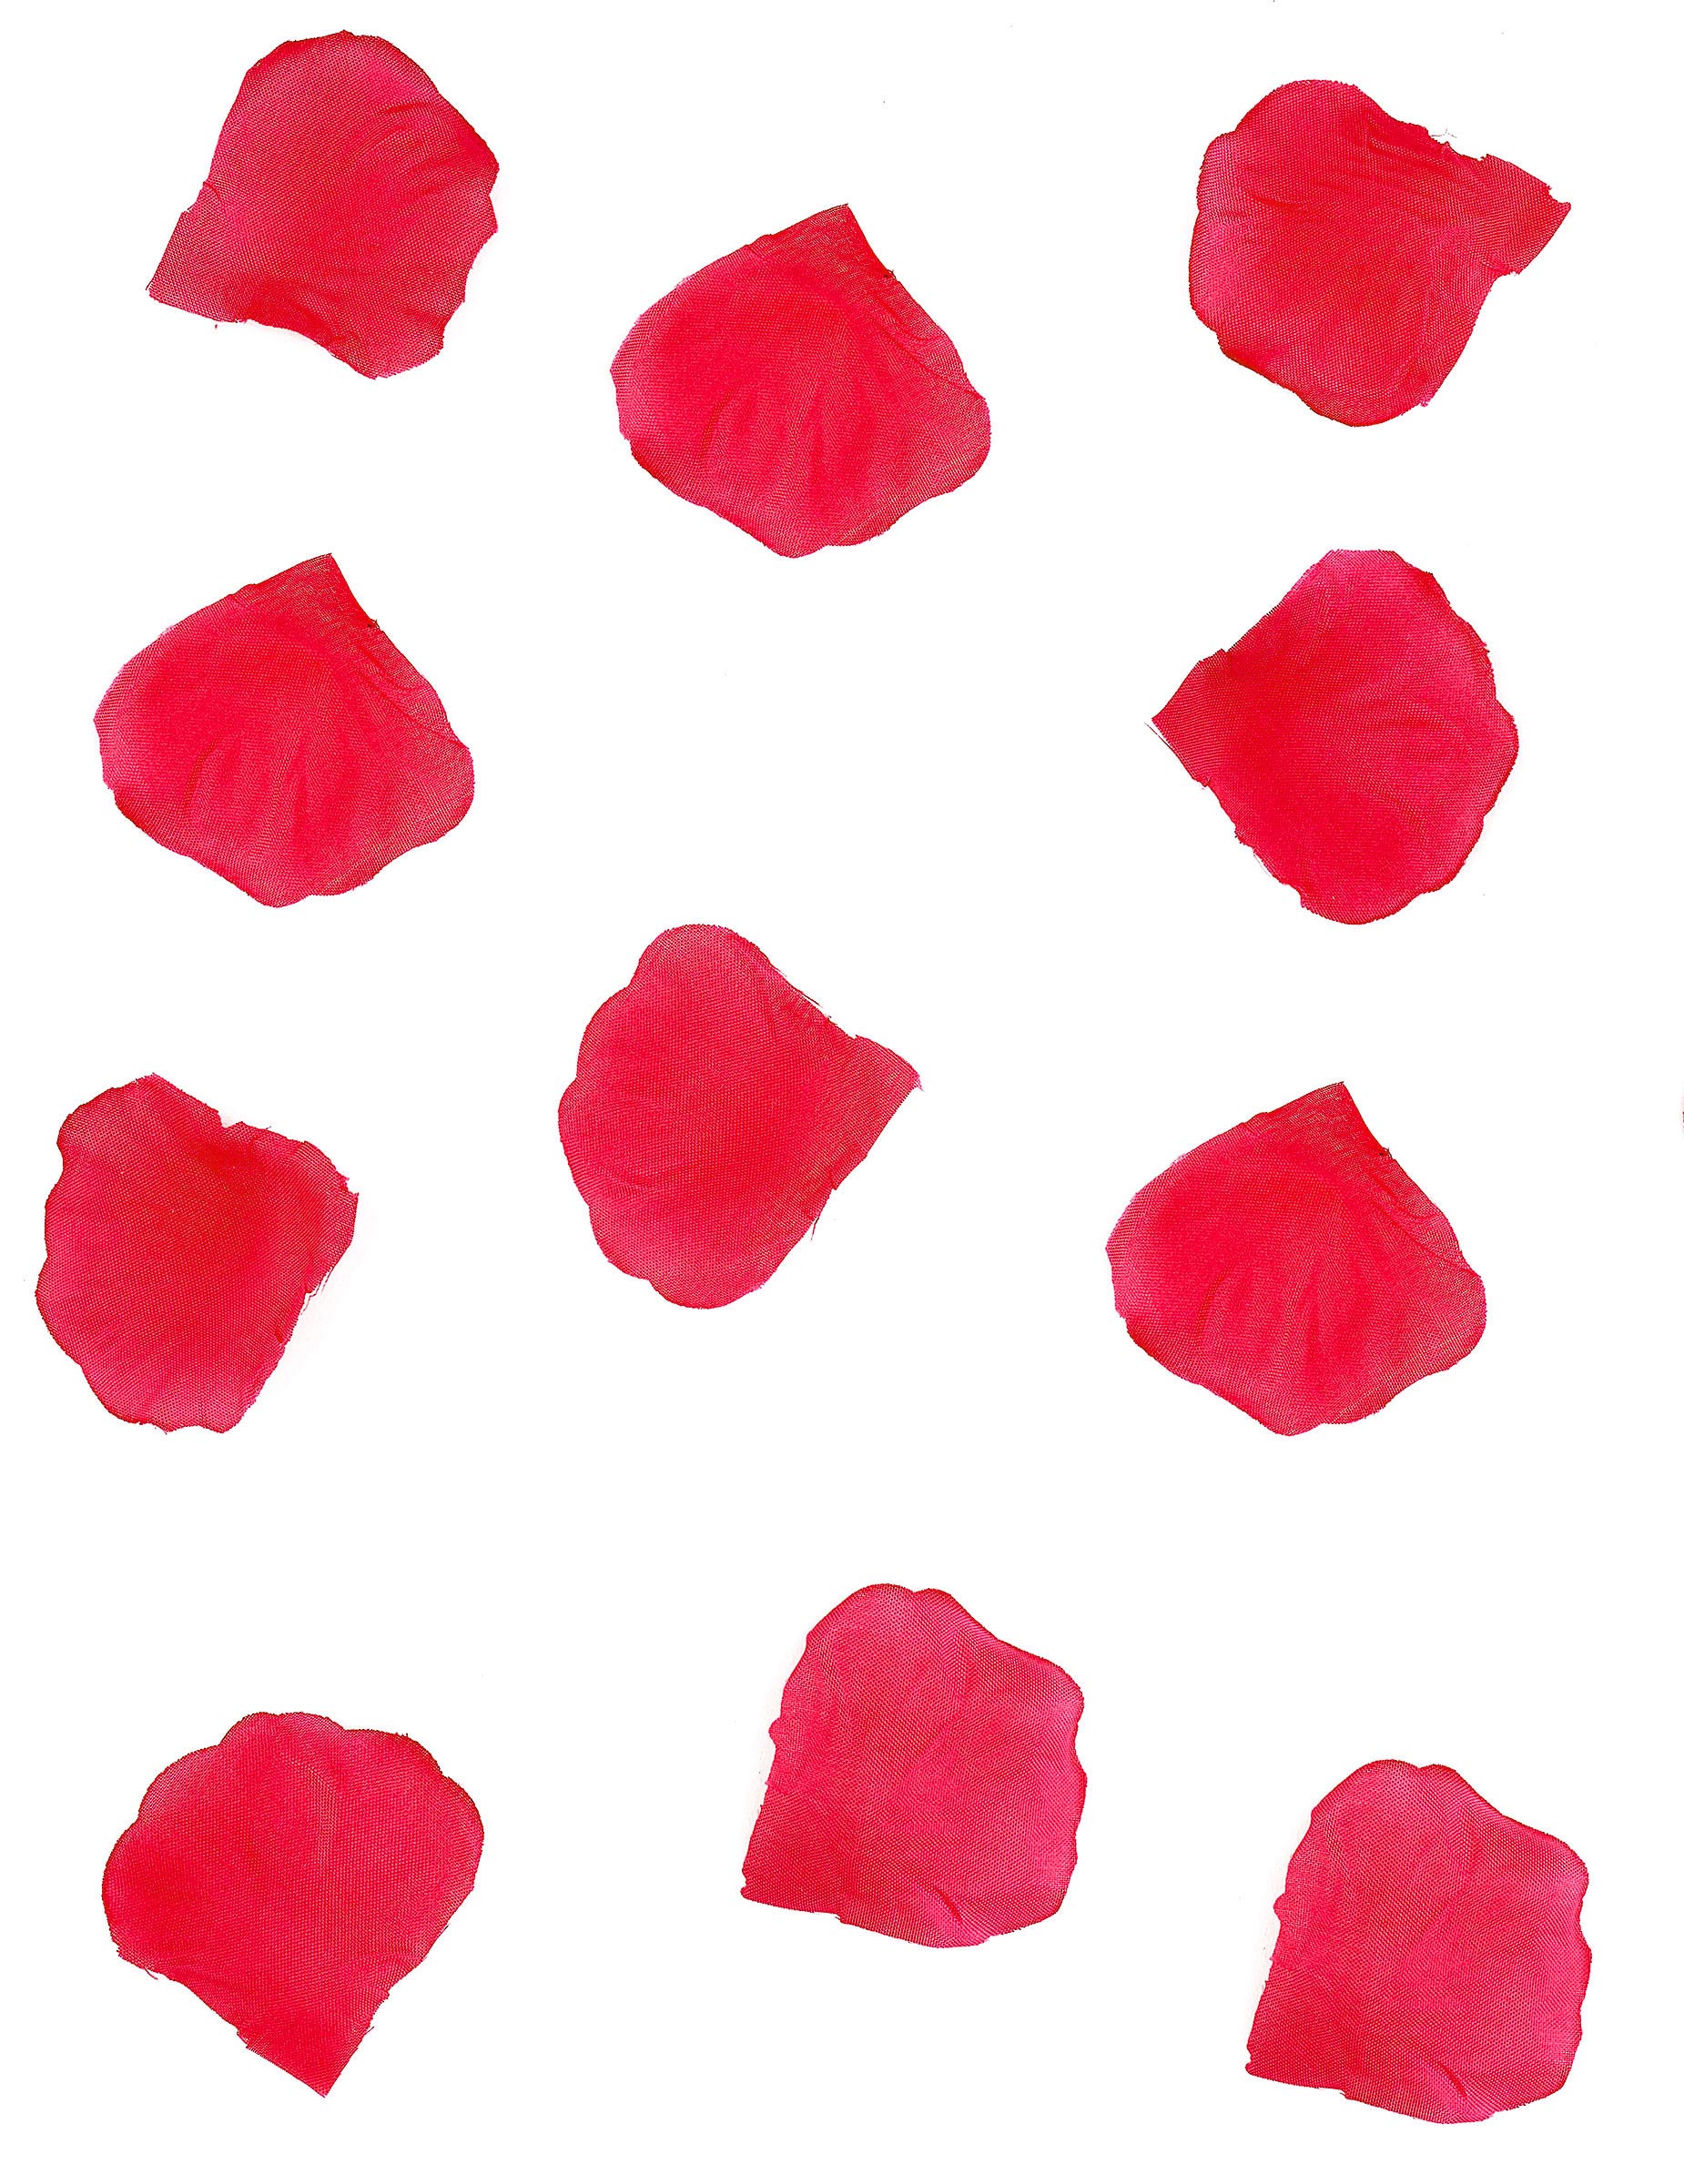 150 Tissue Red Rose Petals: Decorations,and fancy dress costumes ...